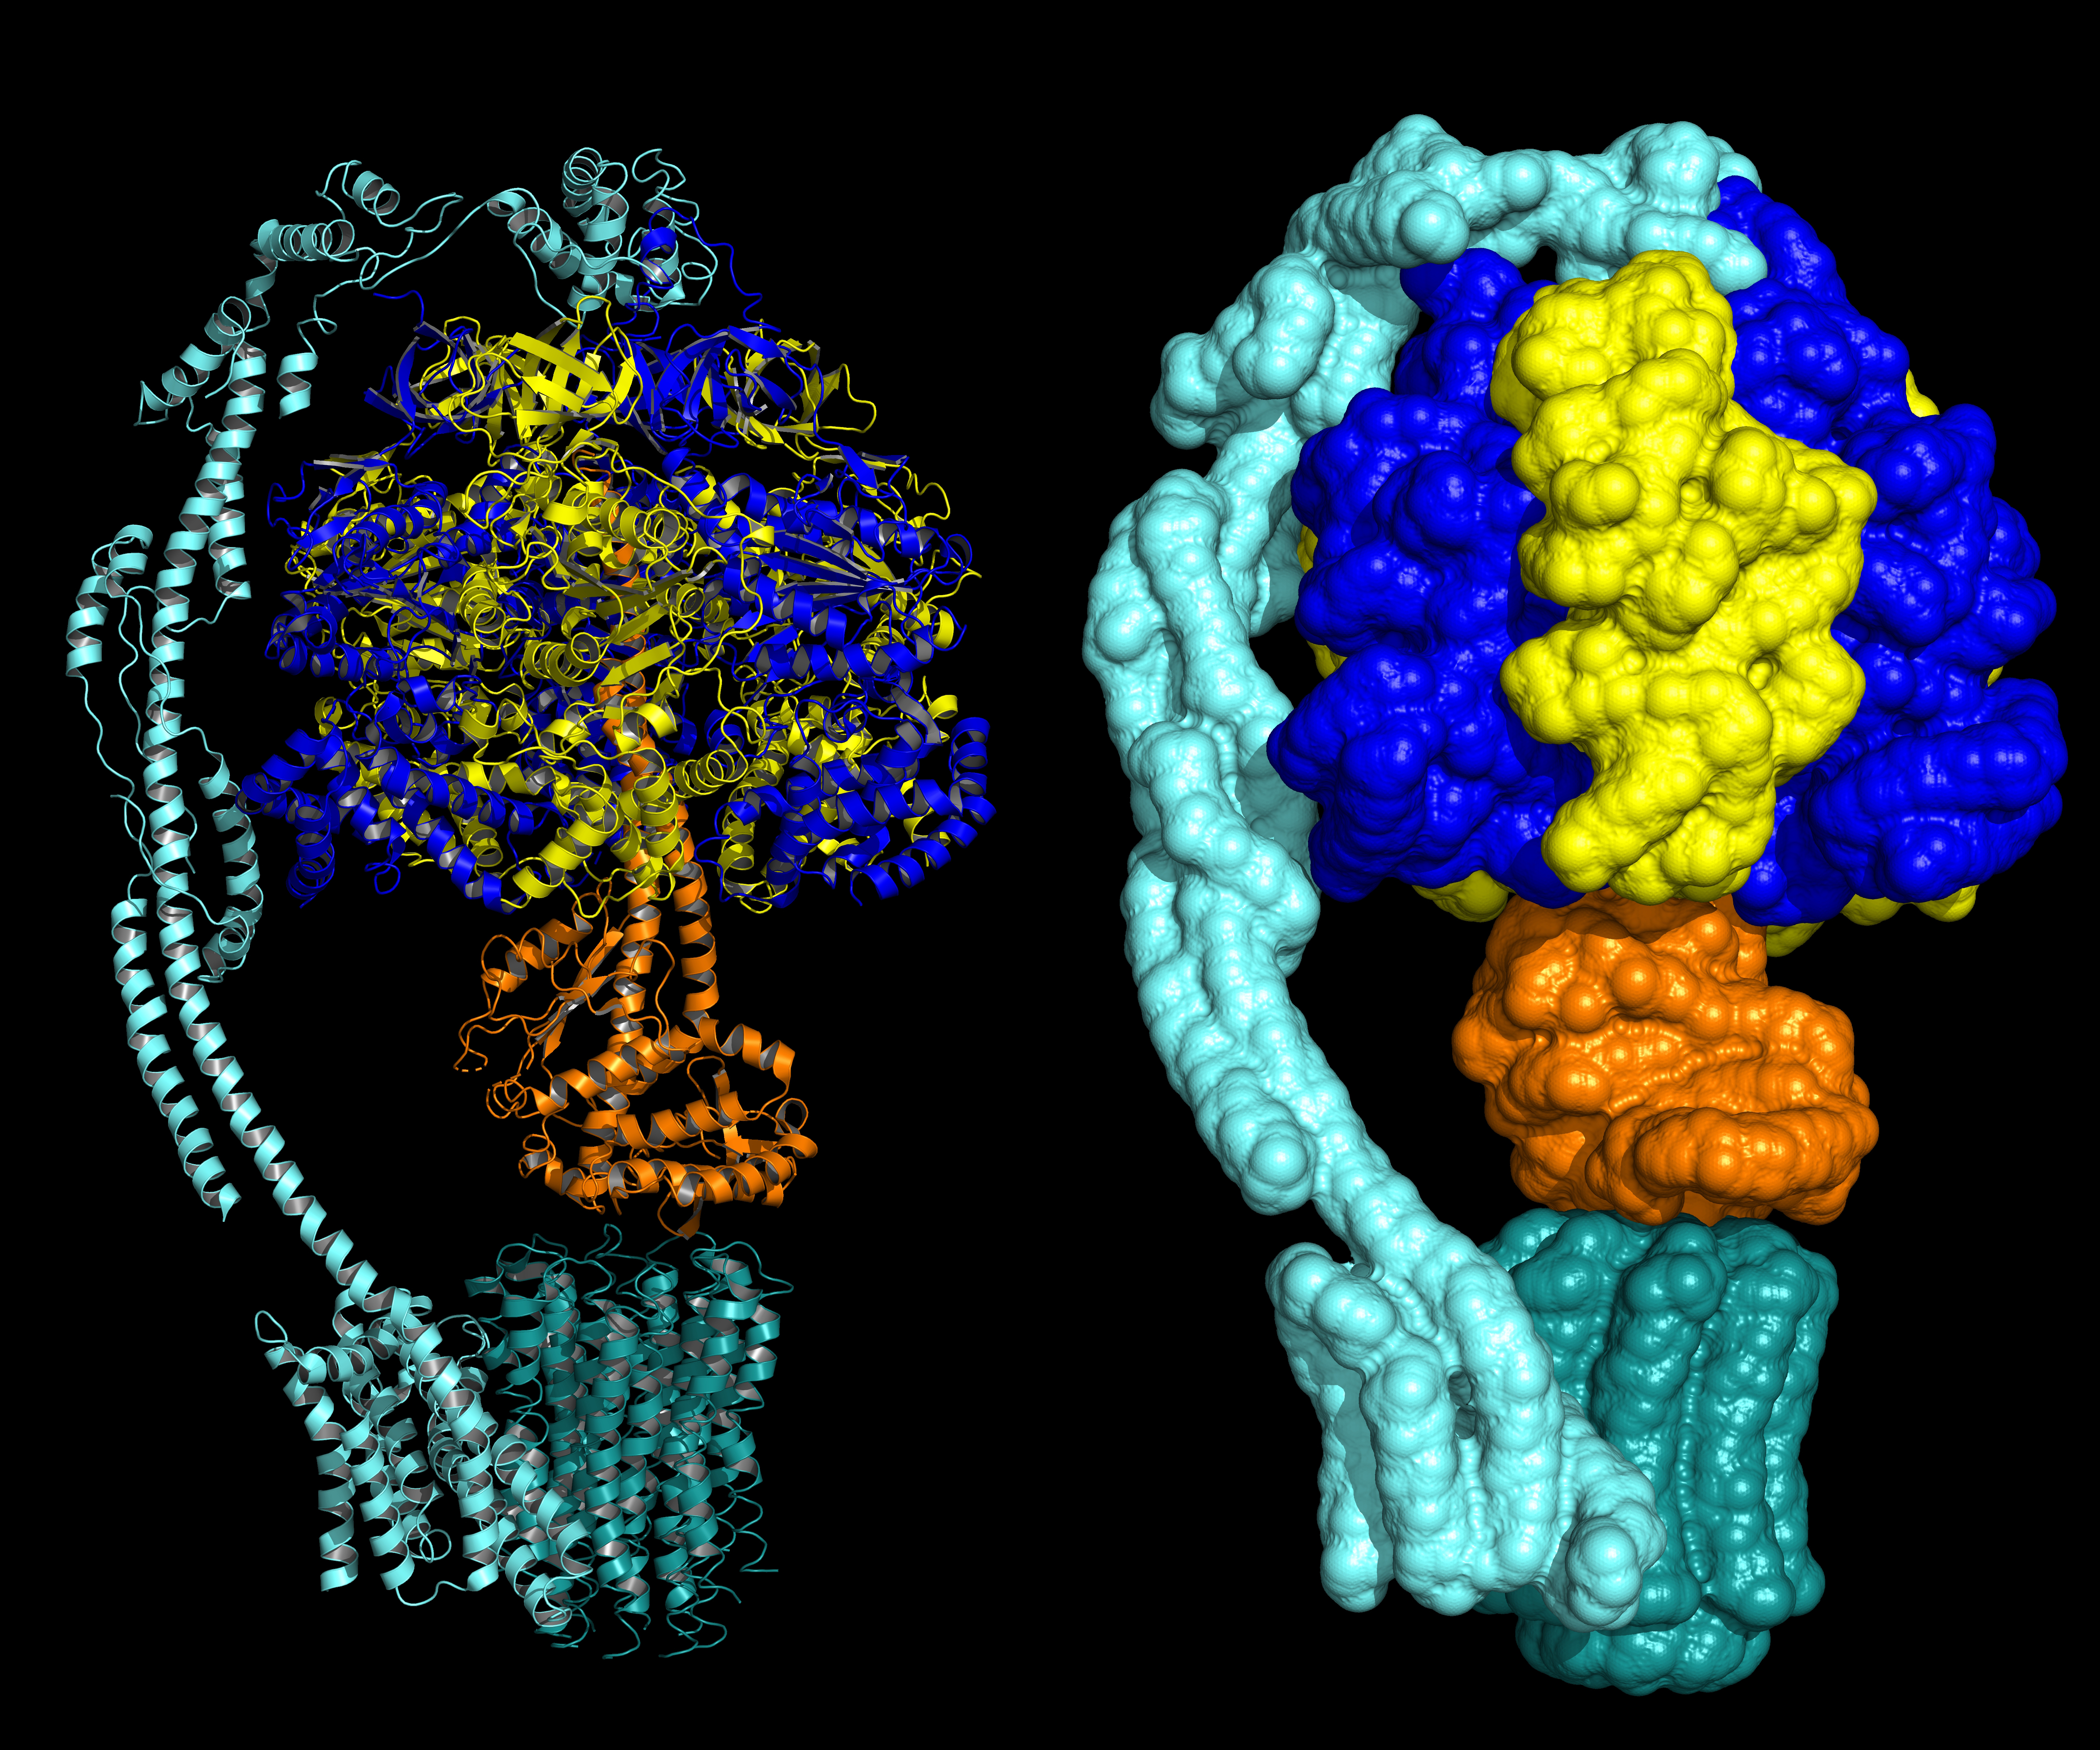 ATP synthase enzyme